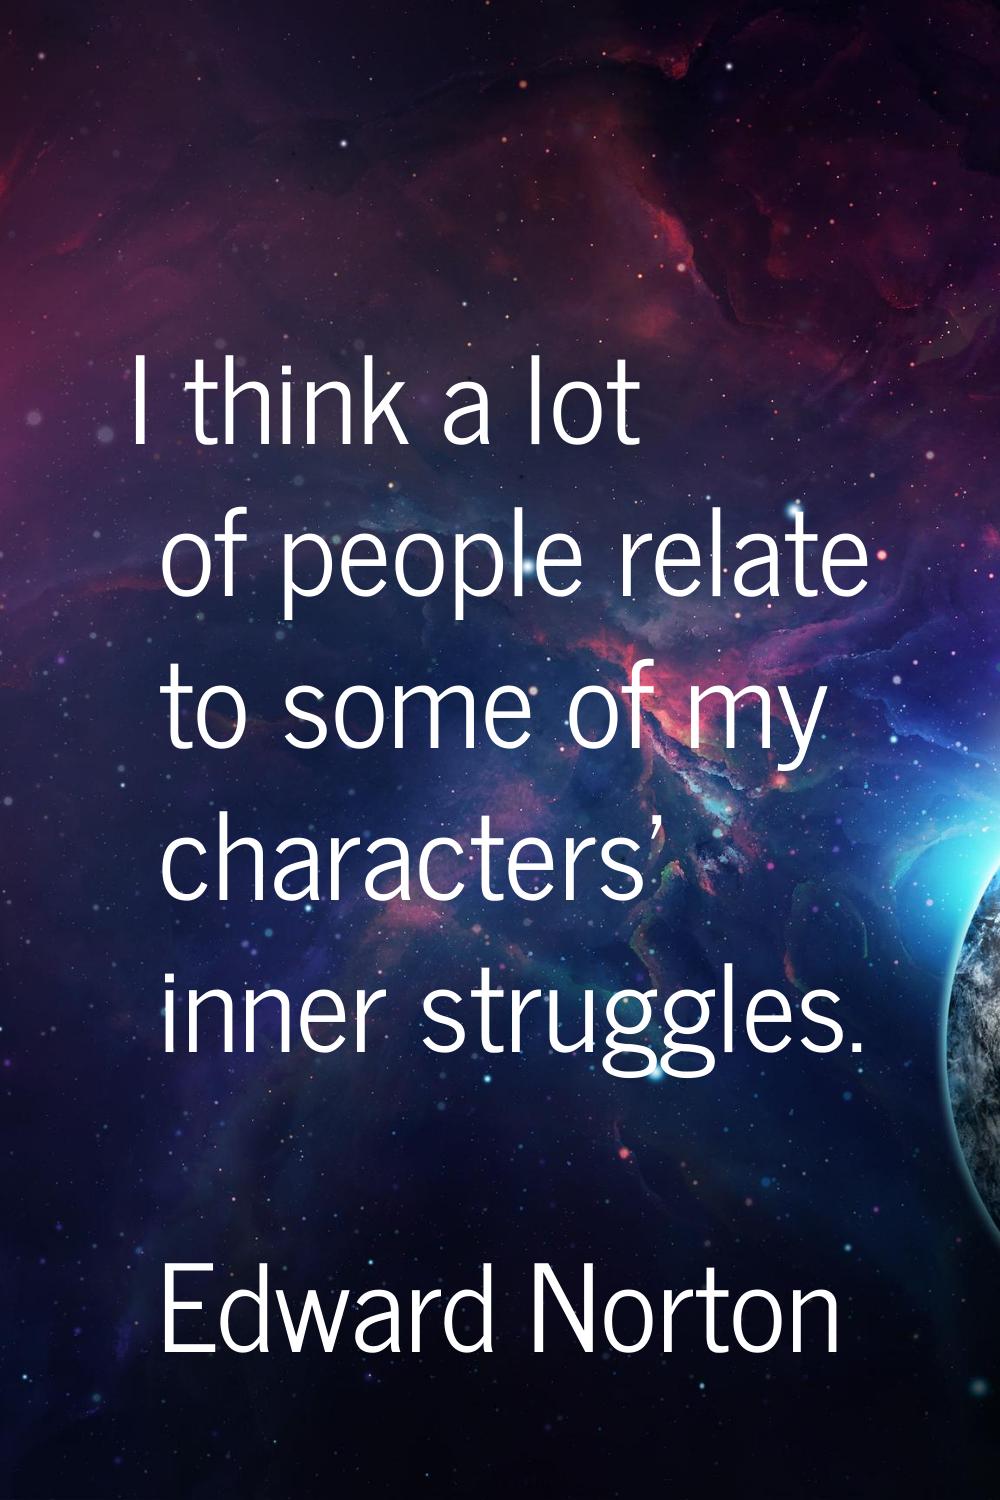 I think a lot of people relate to some of my characters' inner struggles.